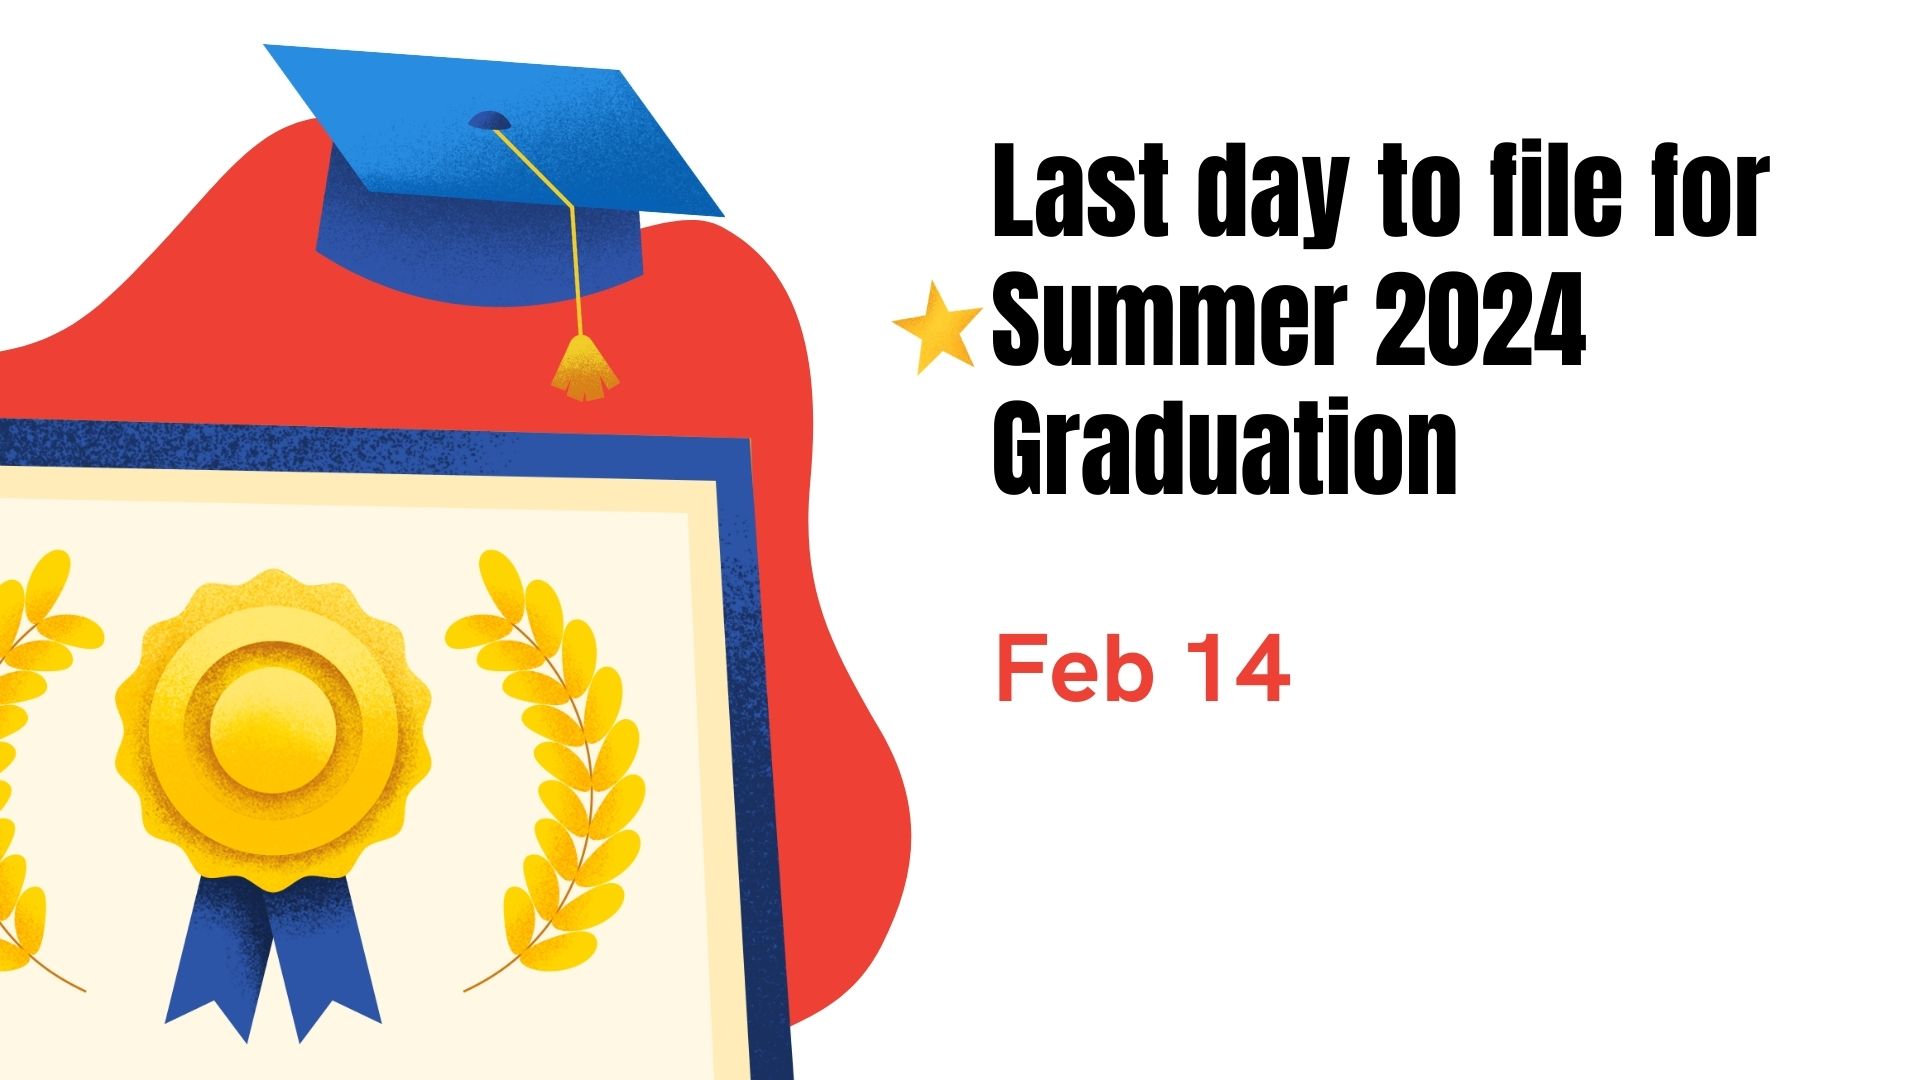 Last day to file for Summer 2024 Graduation